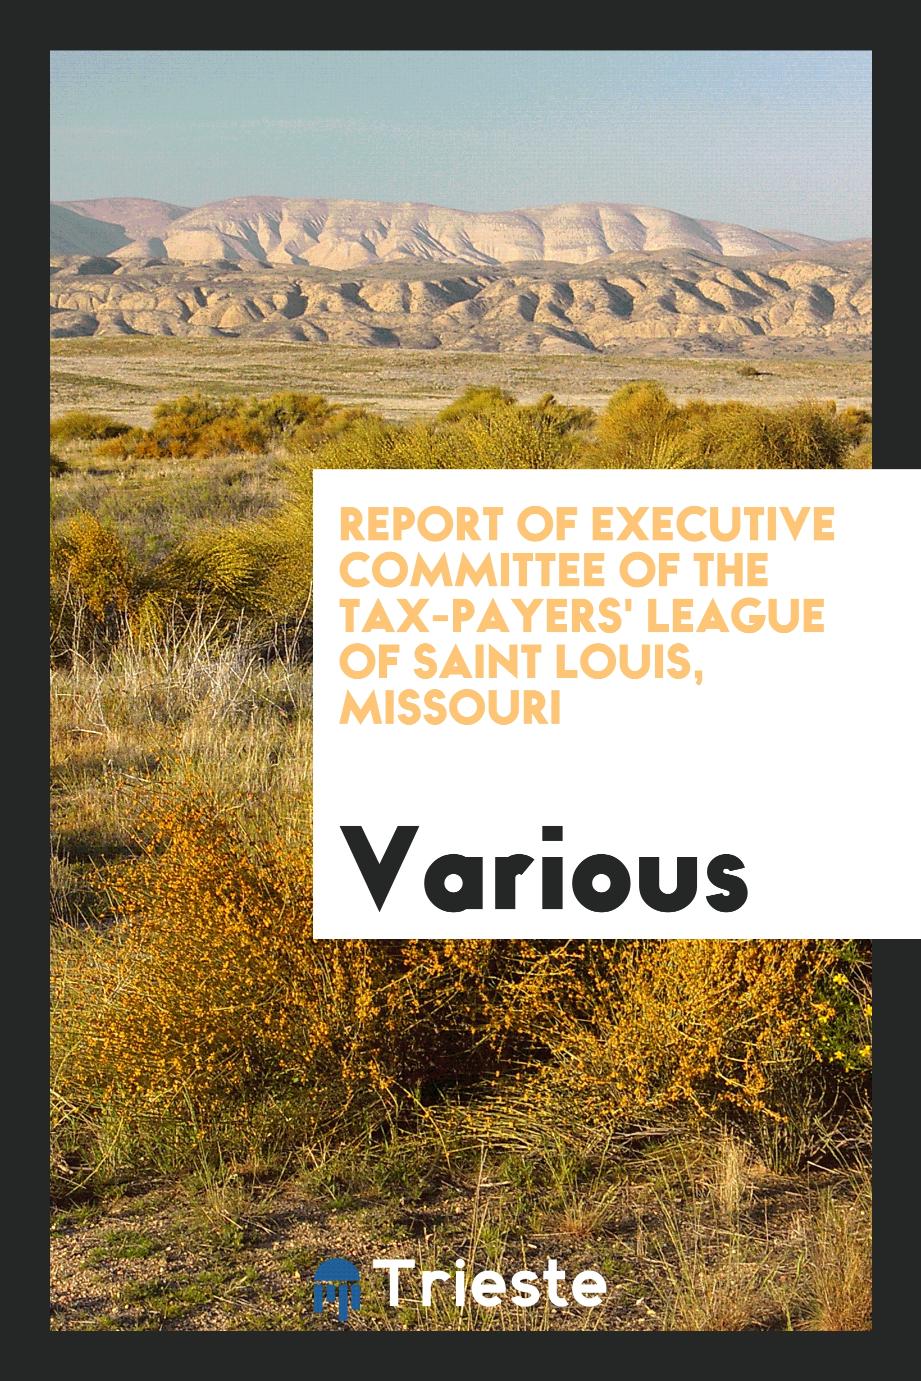 Report of Executive Committee of the Tax-Payers' League of Saint Louis, Missouri